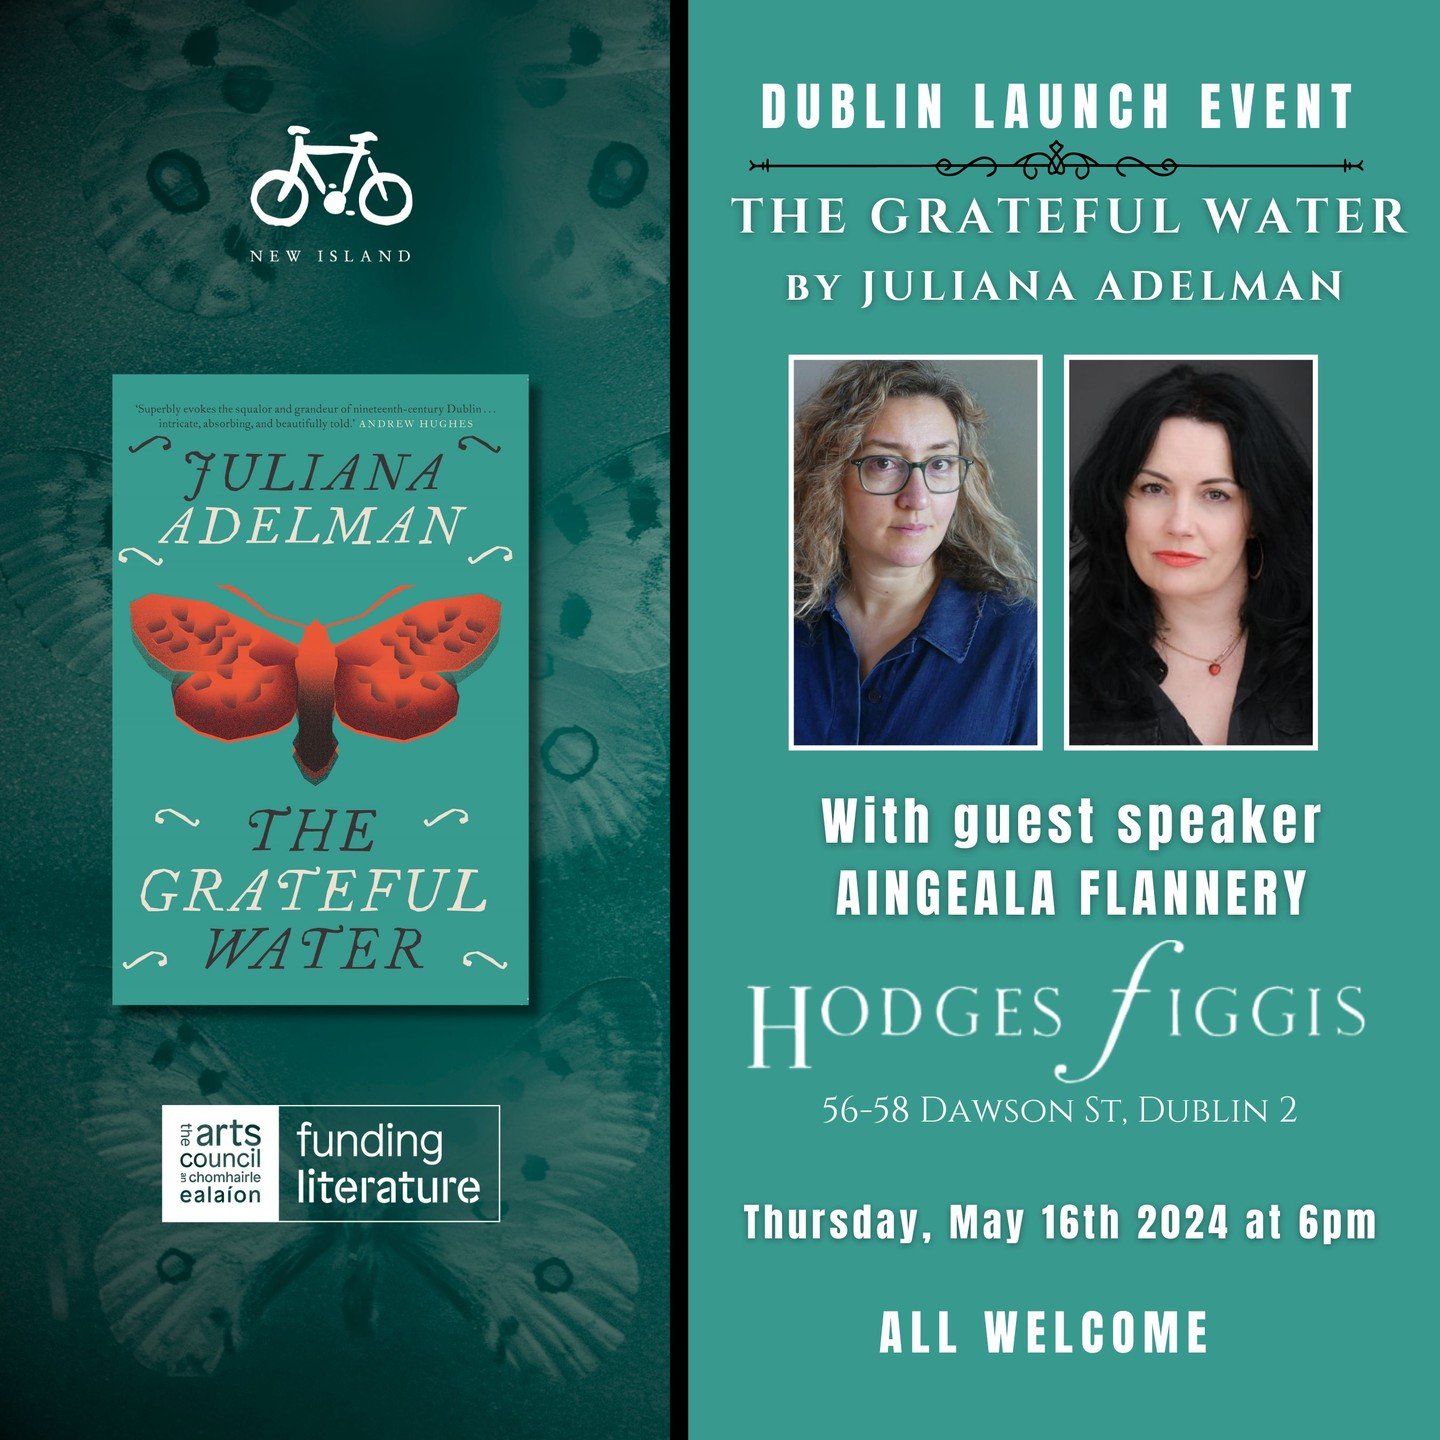 Don't miss the official launch event of THE GRATEFUL WATER by Juliana Adelman in Hodges Figgis on Thursday, May 16th at 6pm with special guest speaker Aingeala Flannery. All welcome! #BookLaunch #TheGratefulWater #NewFiction #HistoricalFiction #Irish